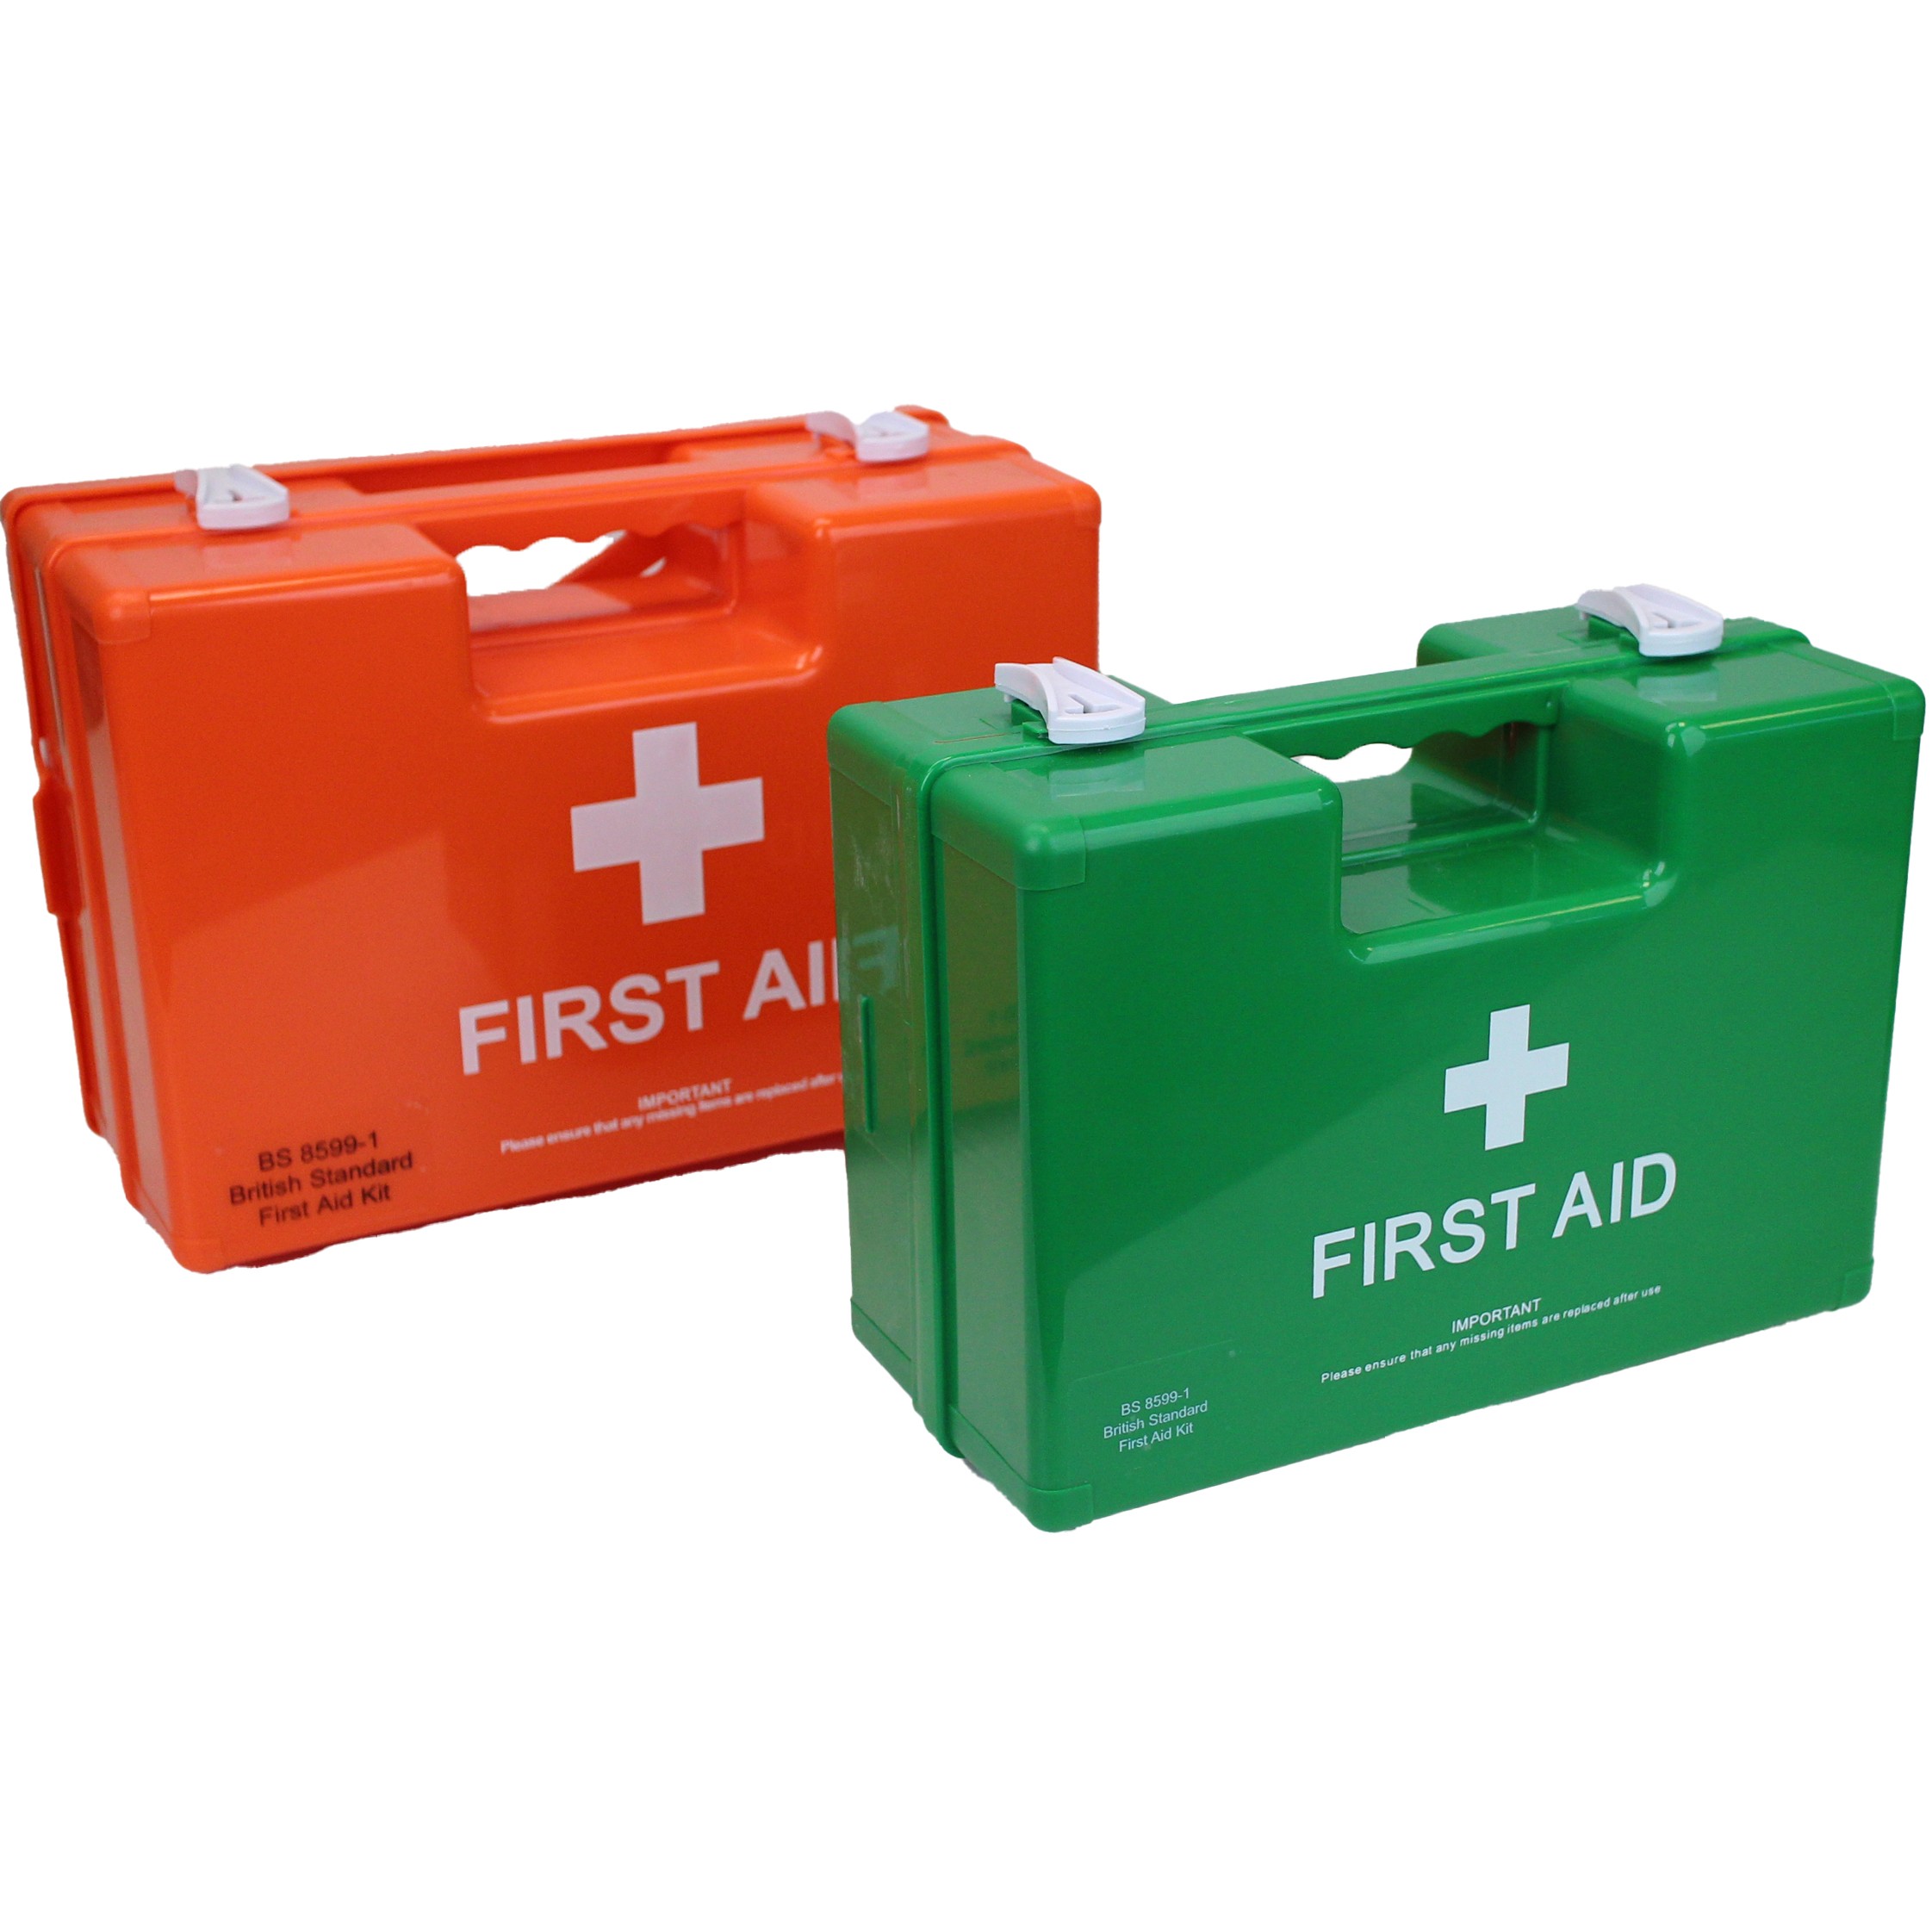 Workplace first aid kits